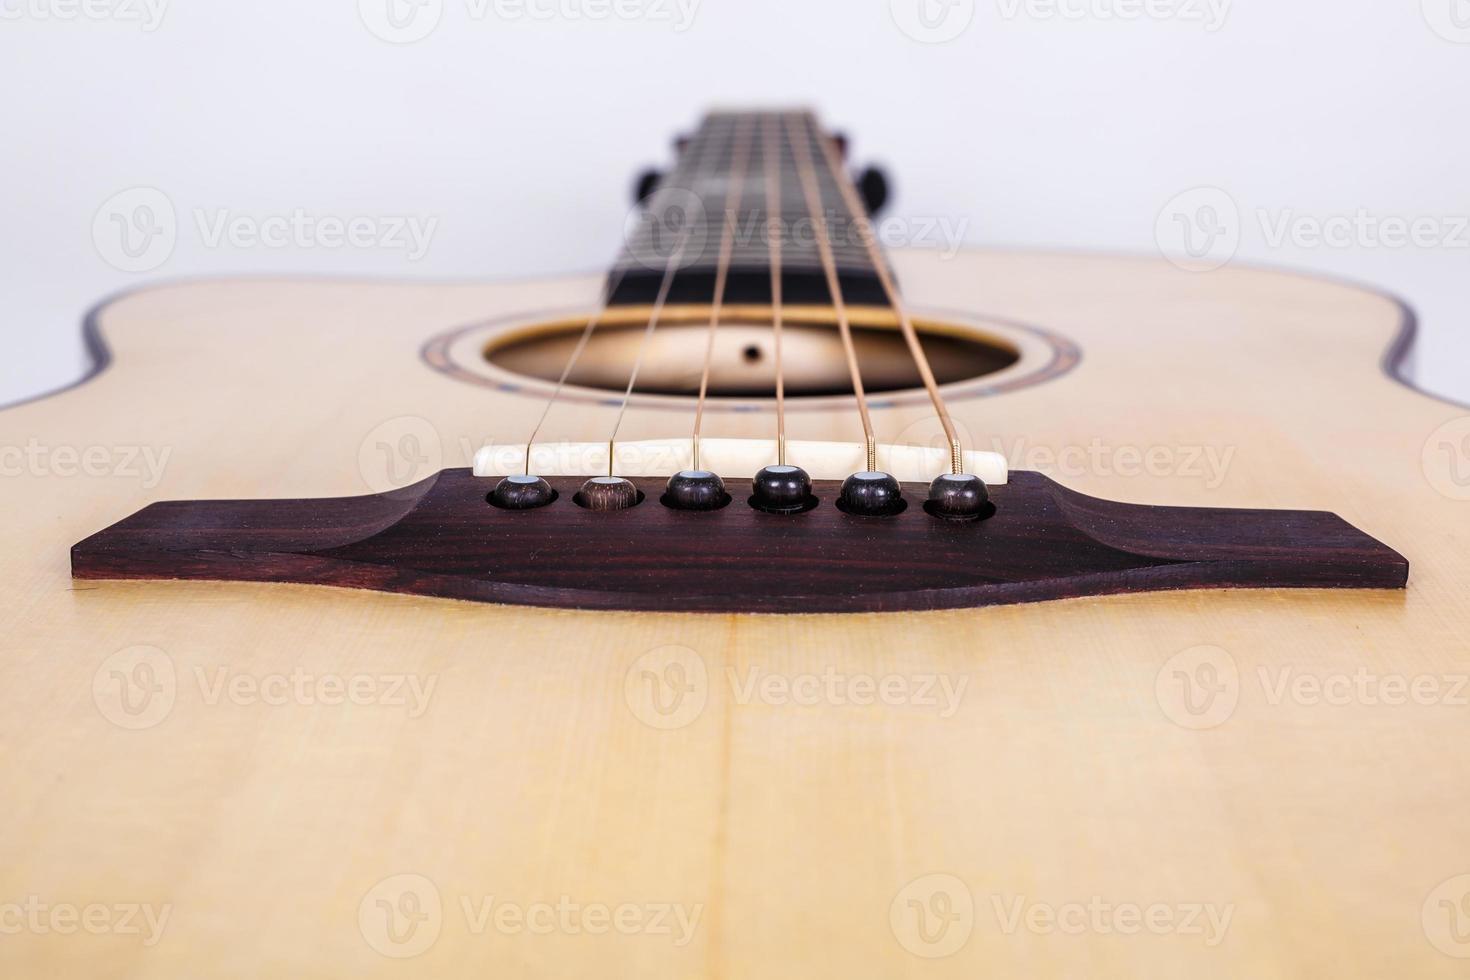 wood texture of lower deck of six strings acoustic guitar on white background. guitar shape photo